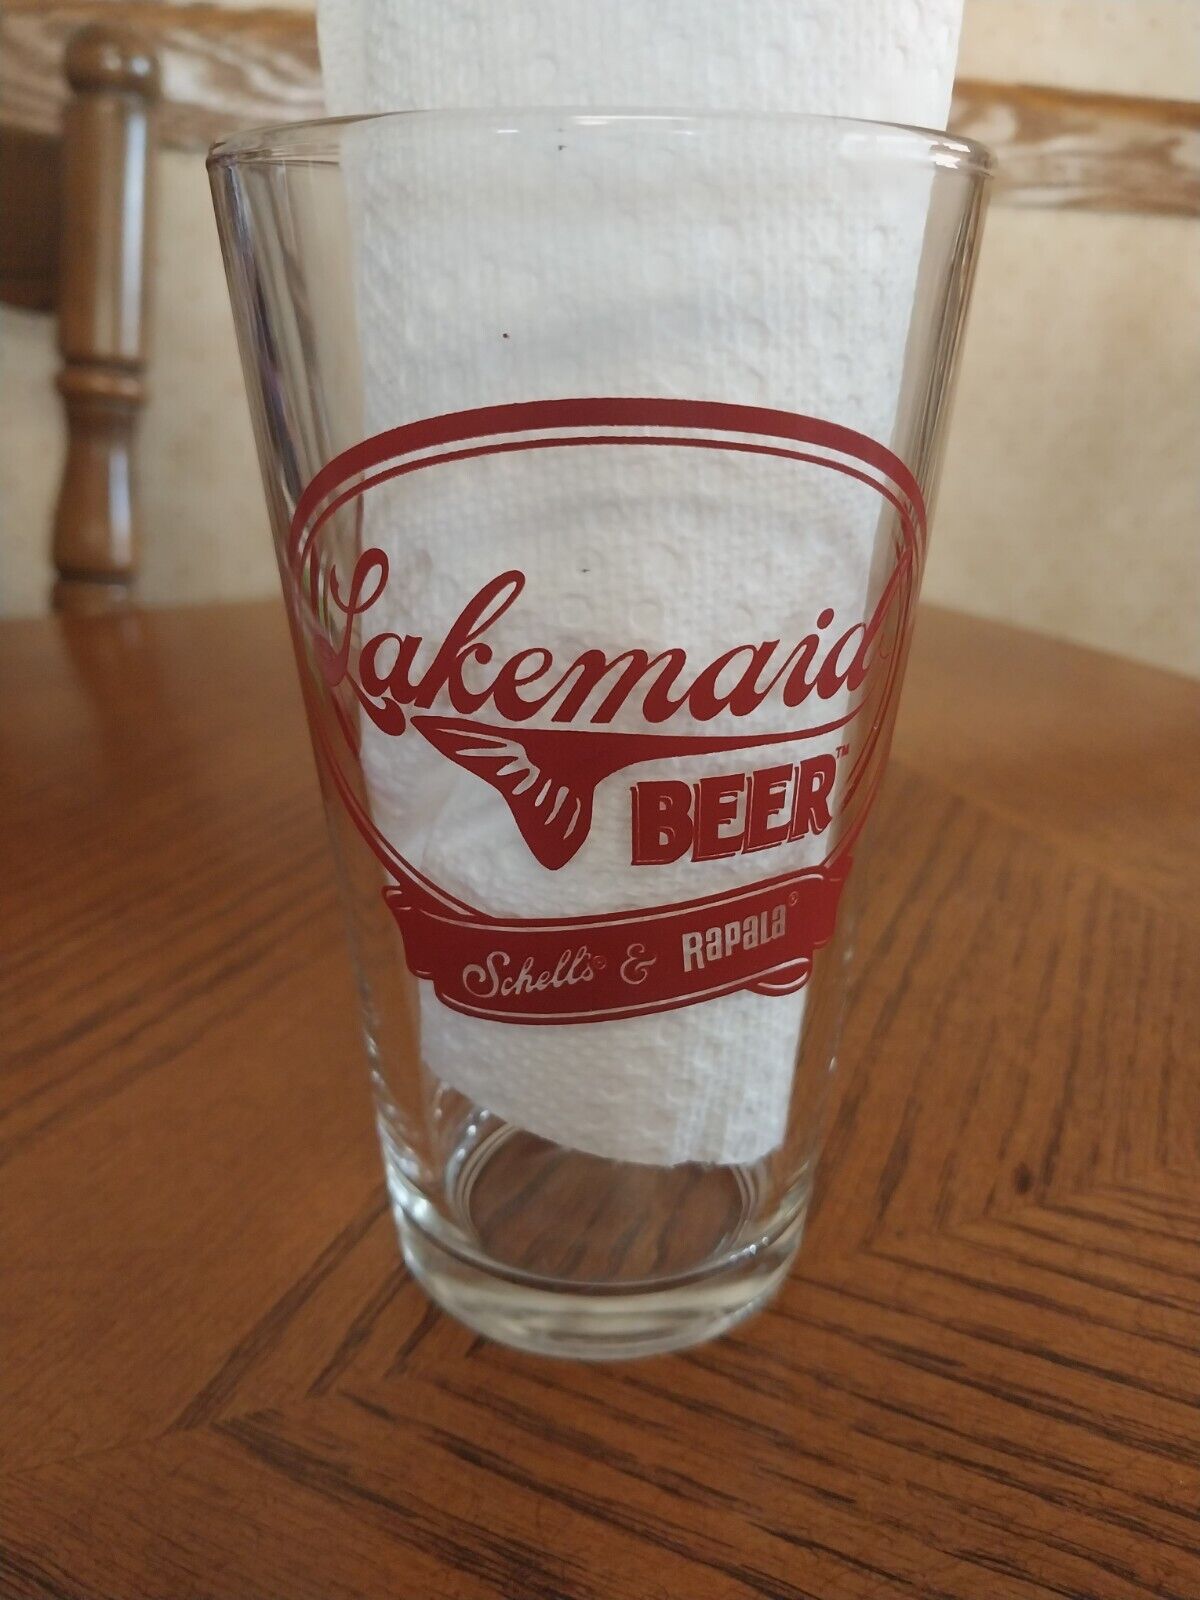 RARE Lakemaid BEER Shell's & RAPALA Clear Glass Red Lettering Pint Brewery Glass